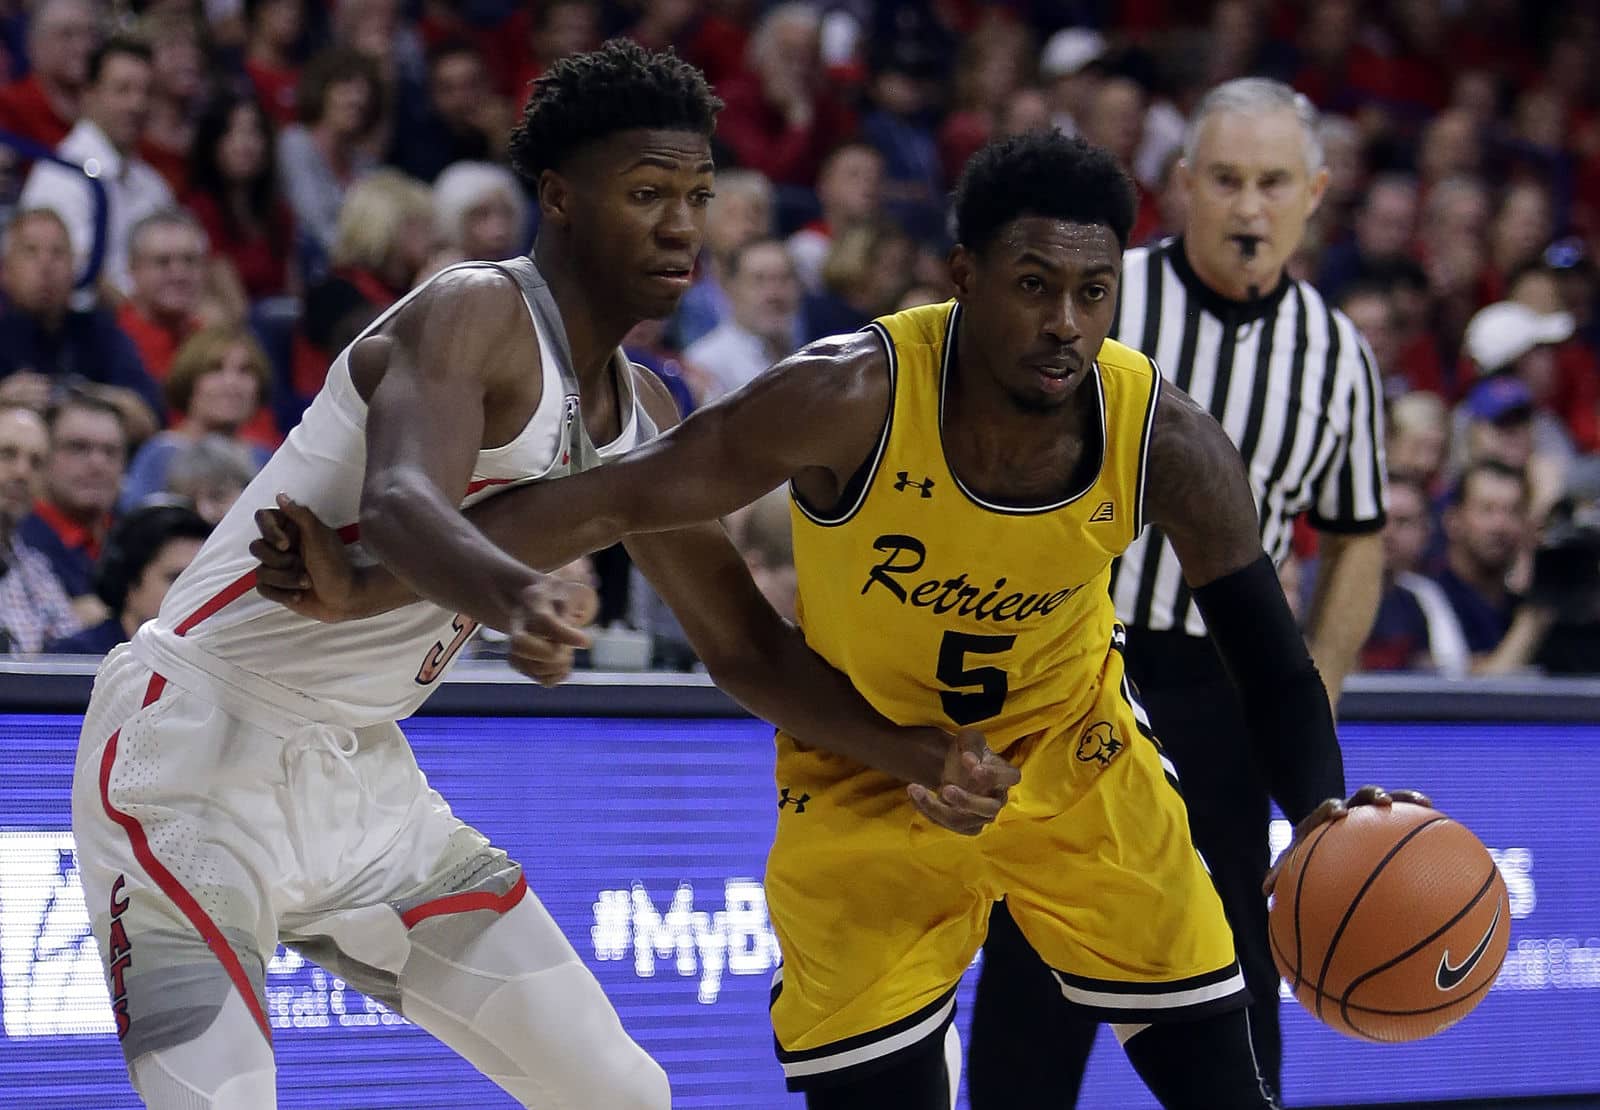 University of Maryland Baltimore County men's basketball team punched their ticket to the NCAA Tournament with a win over Vermont. It's their first trip to the tournament in 10 years. File. (AP Photo/Rick Scuteri)